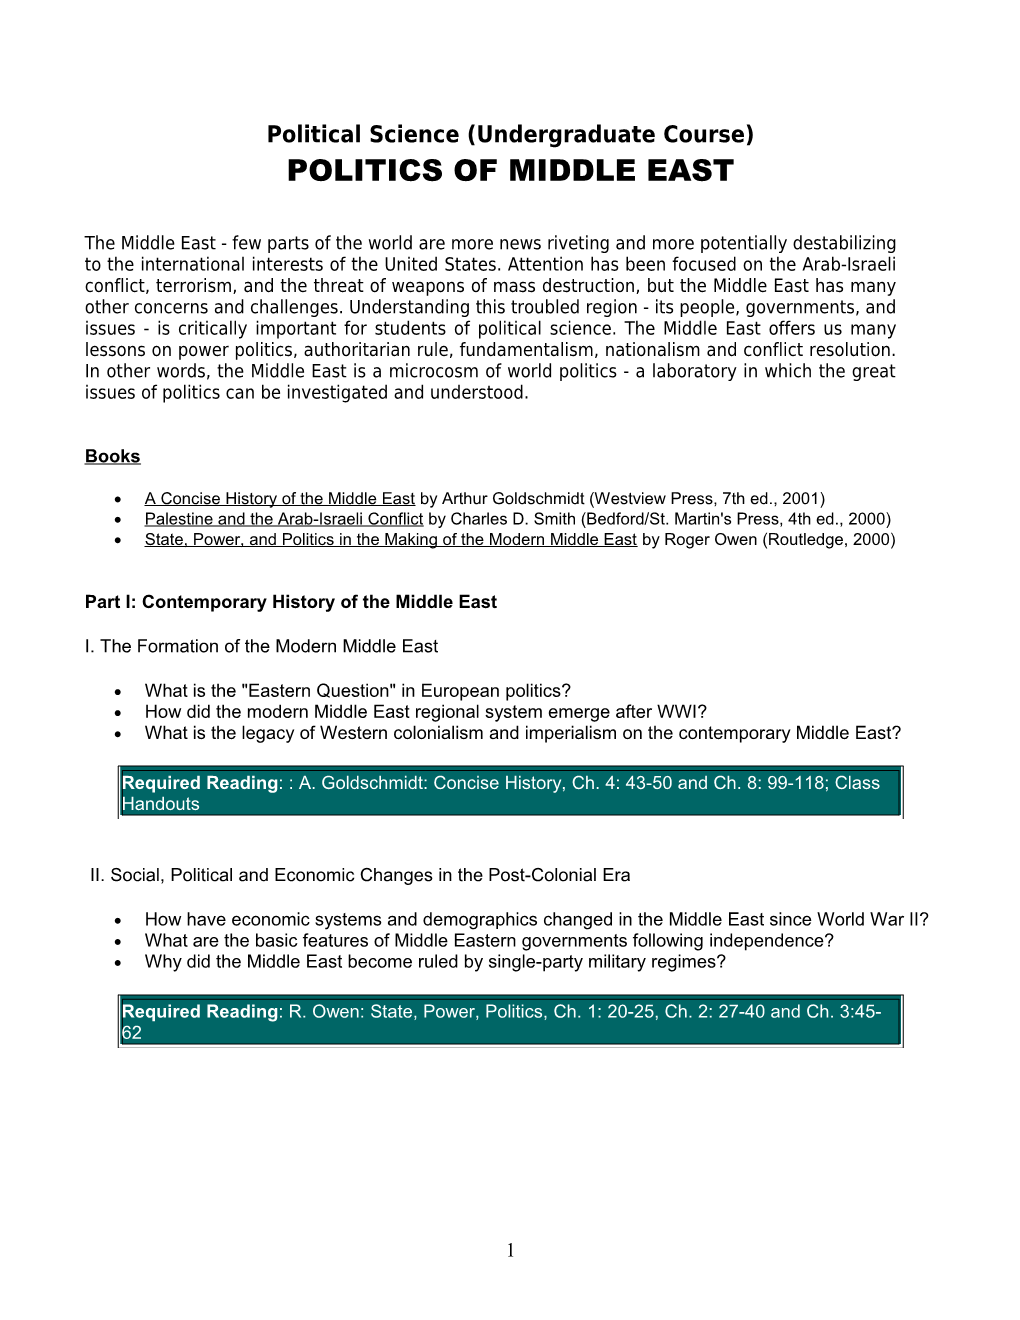 Politics of Middle East